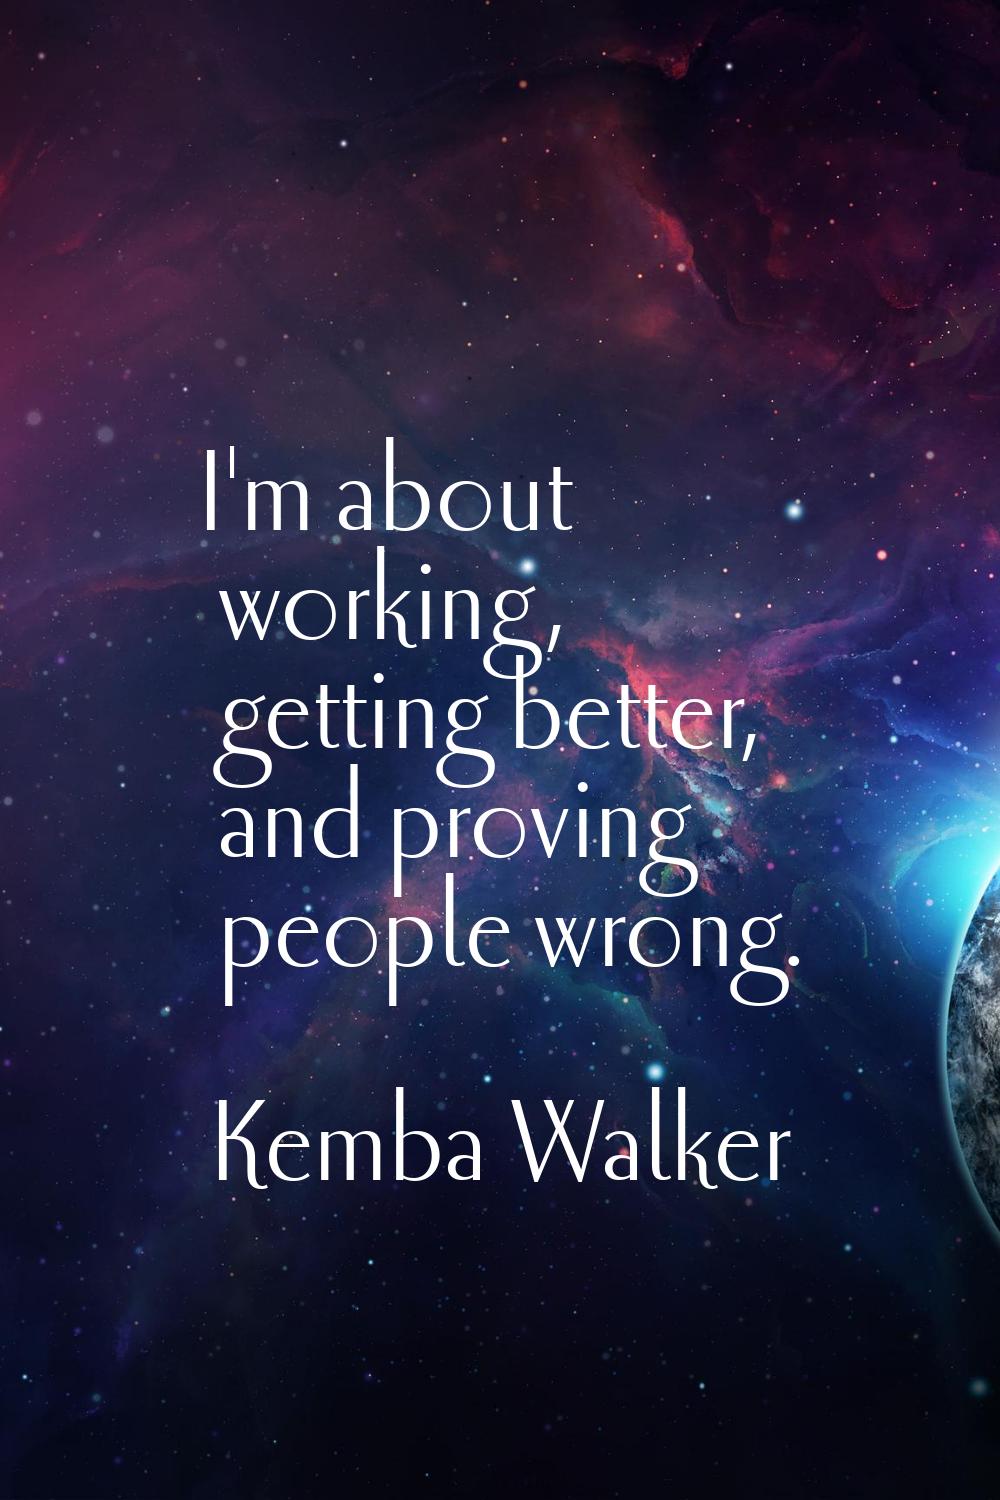 I'm about working, getting better, and proving people wrong.